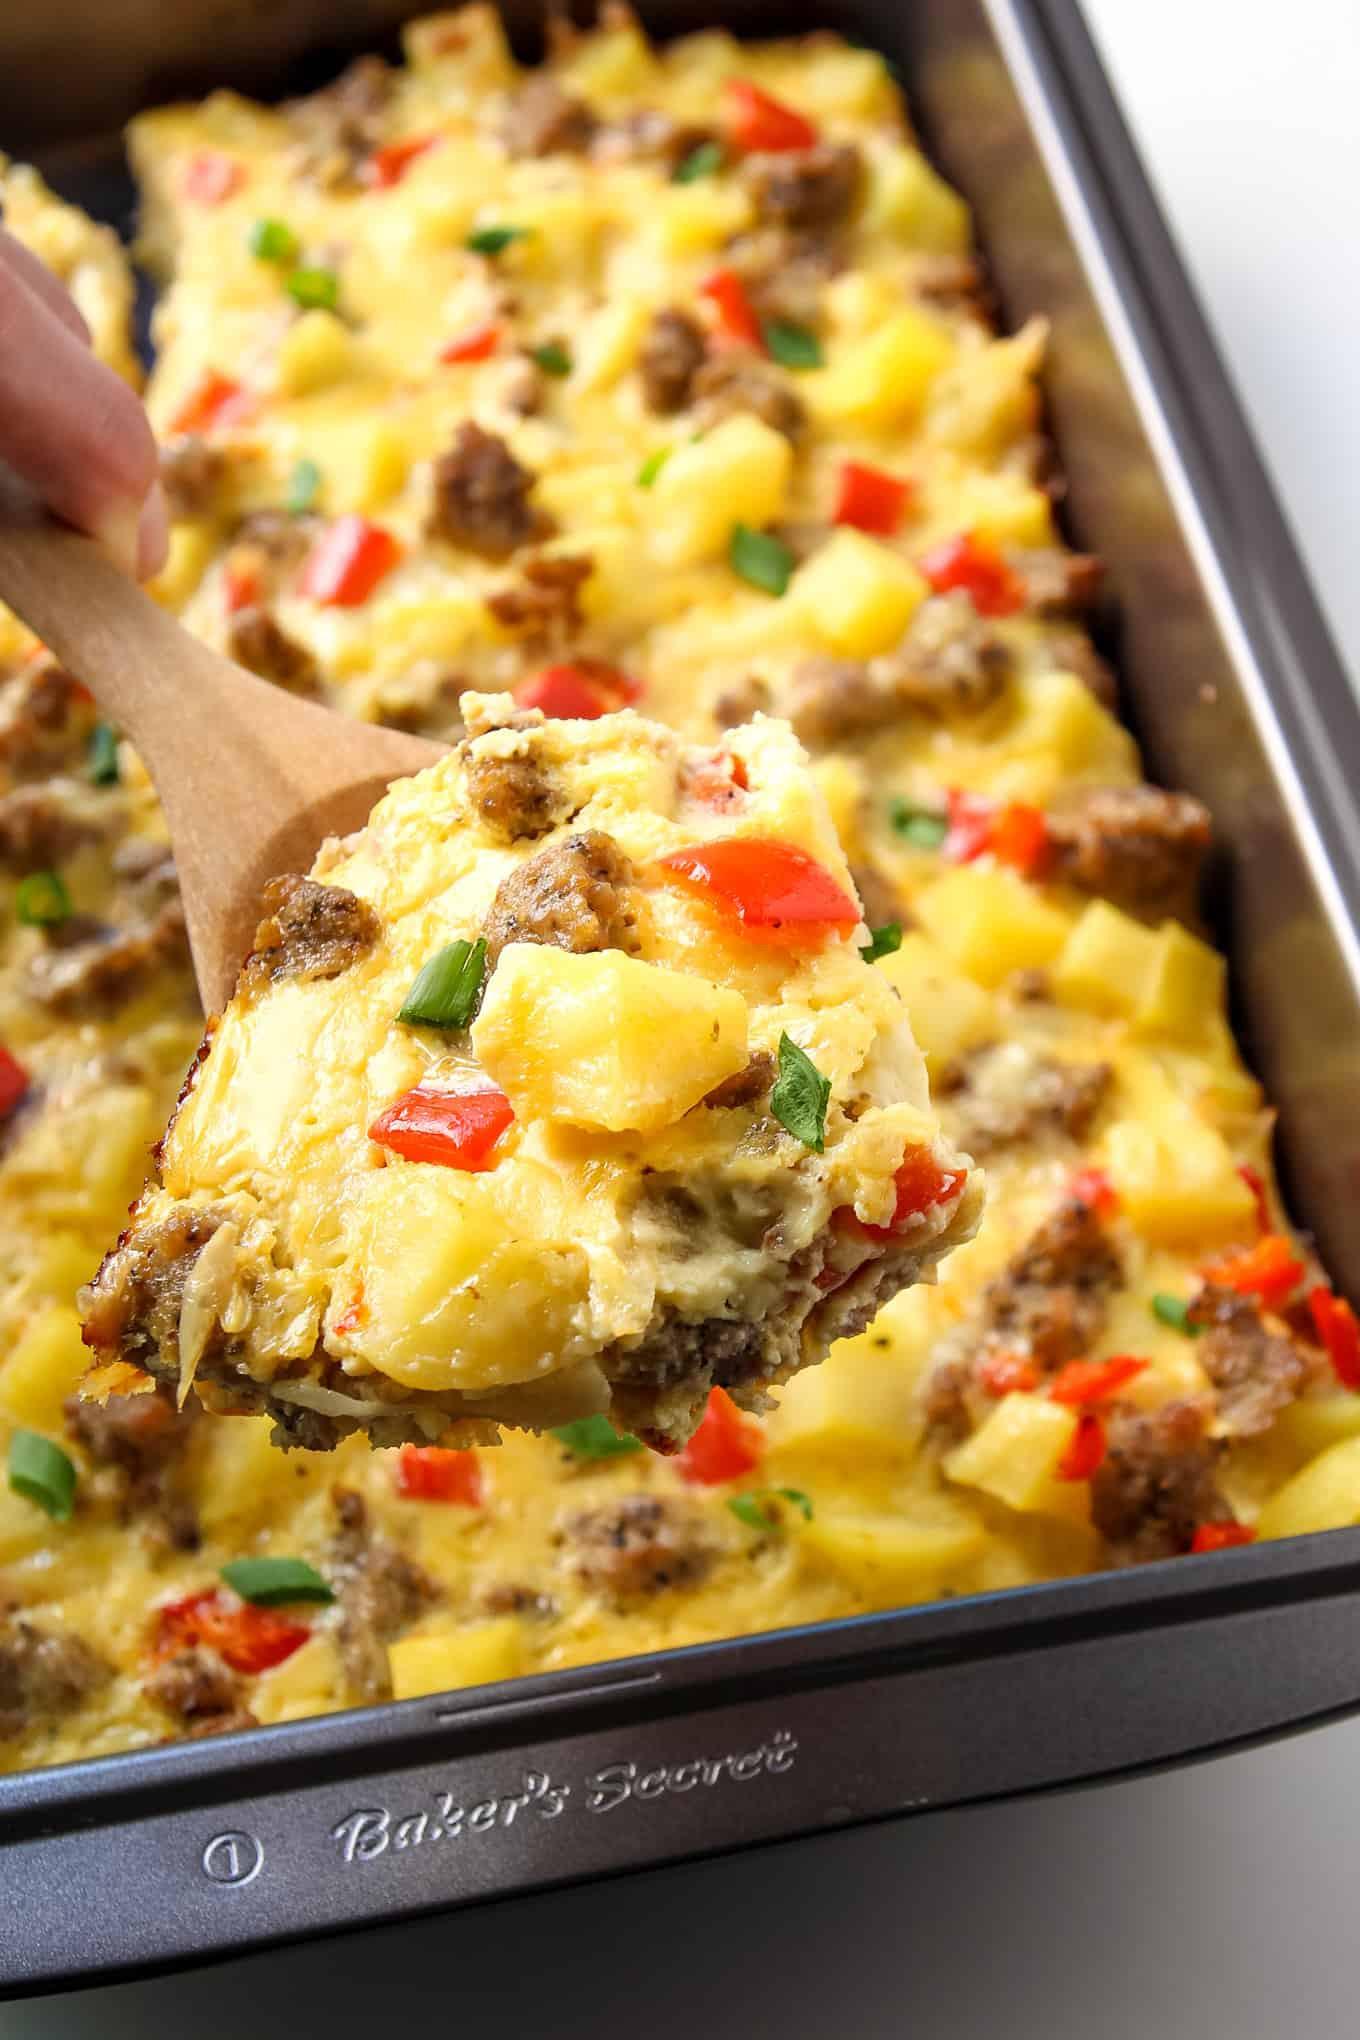 Easy Breakfast Casseroles New Breakfast Casserole with Eggs Potatoes and Sausage